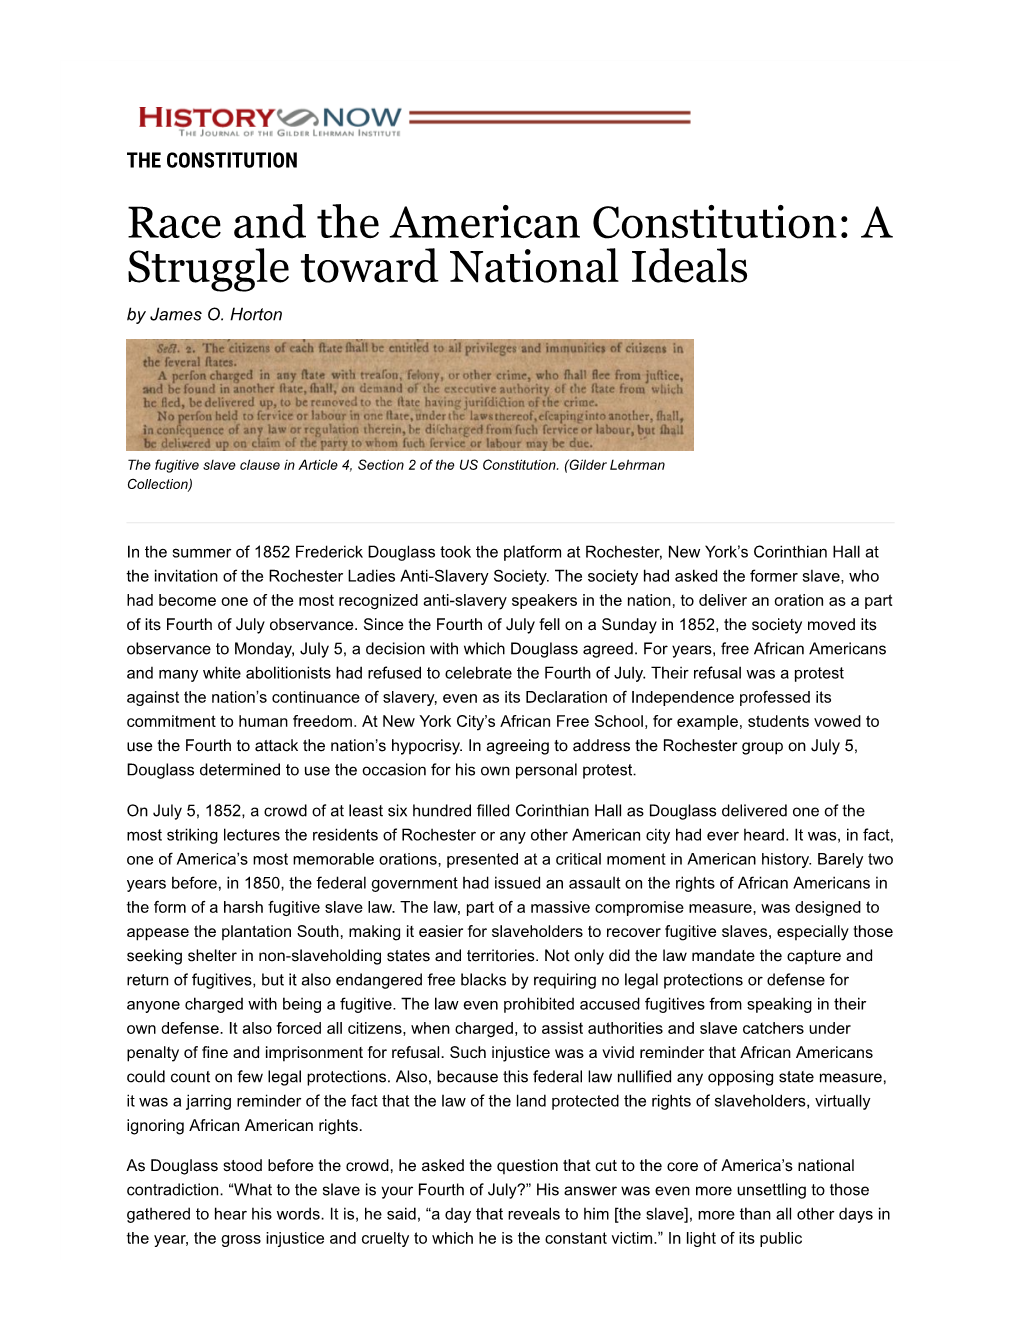 Race and the American Constitution: a Struggle Toward National Ideals by James O